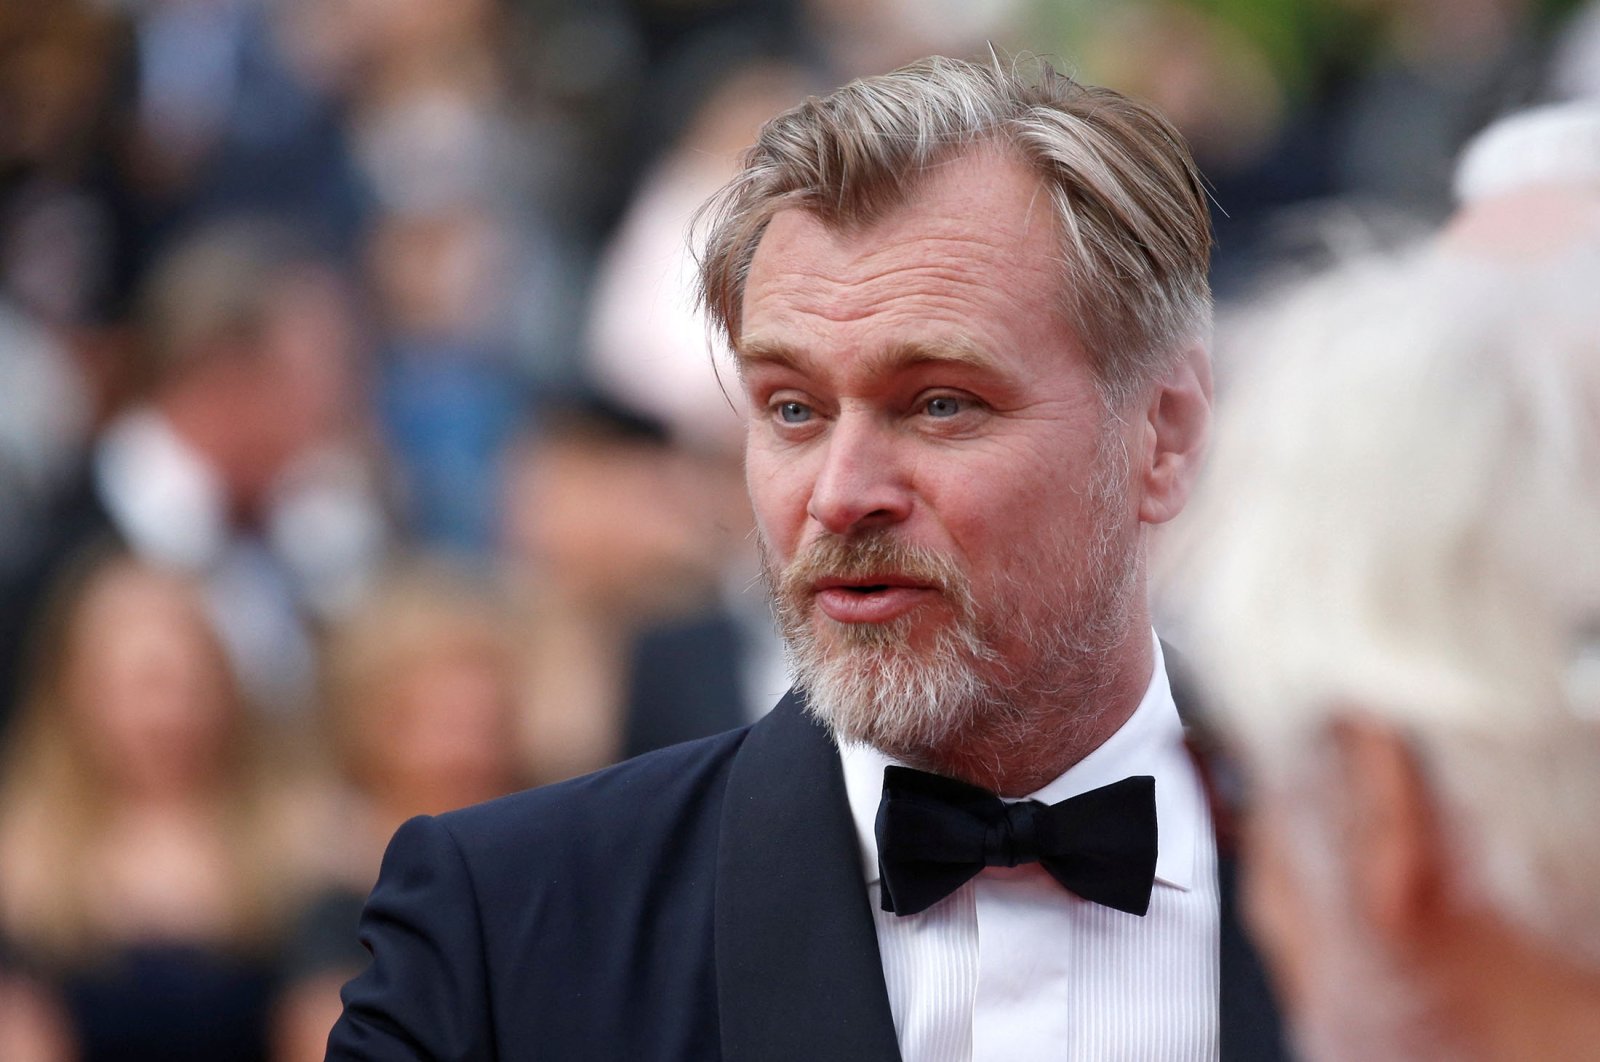 Director Christopher Nolan poses for a photo during the 71st Cannes Film Festival, in Cannes, France, May 13, 2018. (Reuters Photo)